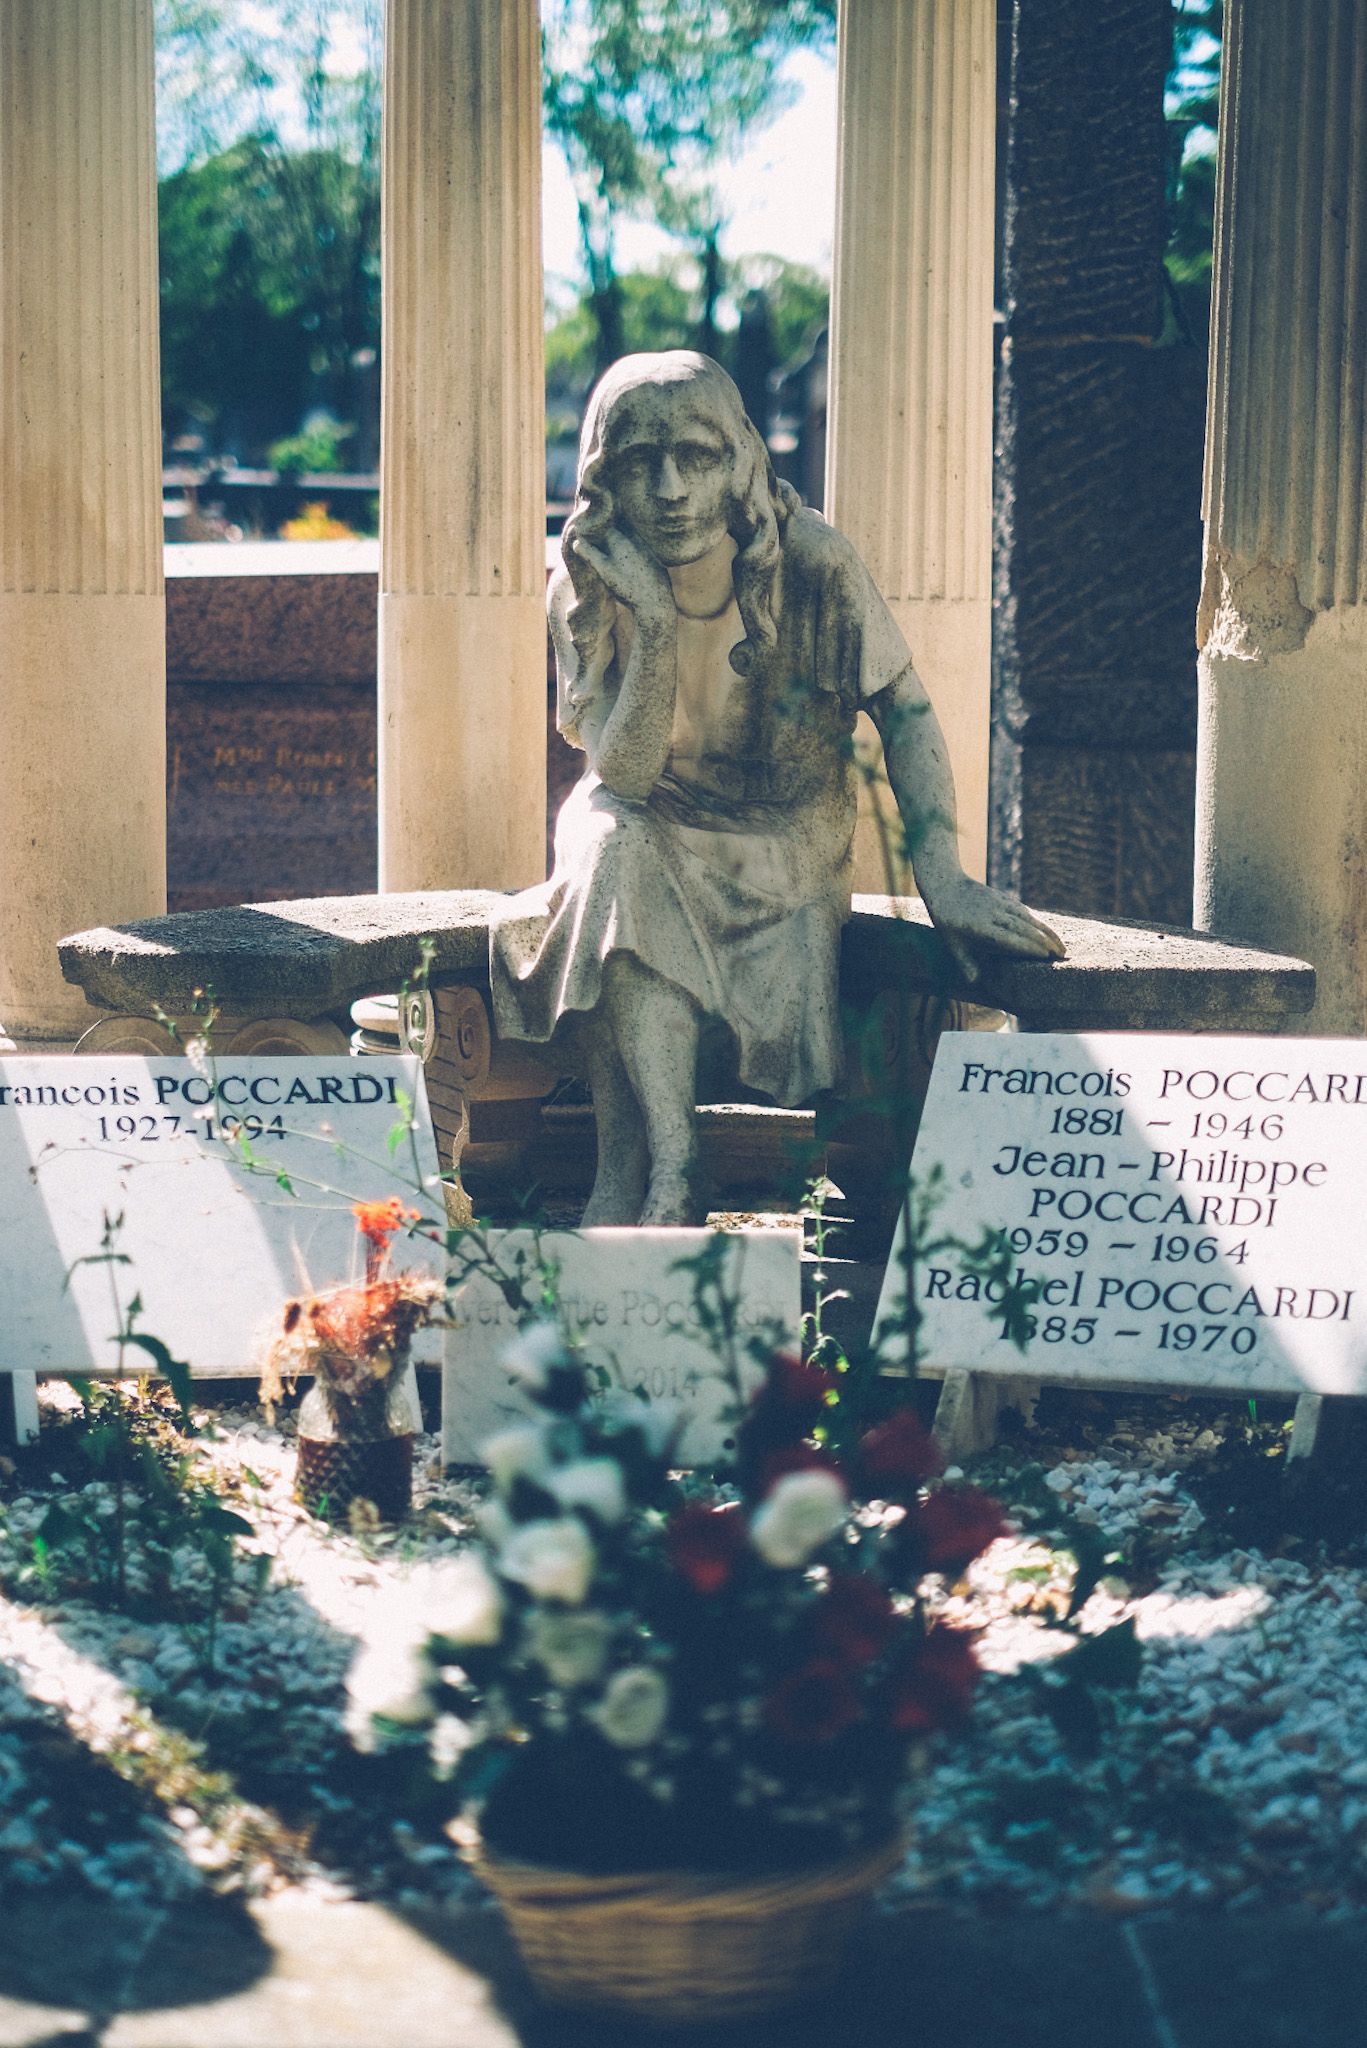 A statue atop a grave in Pére Lachaise cemetery holds its chin in its hand as if looking into the camera. Behind it are four columns, beside it are gravestones with French names, and in front is a bouquet of flowers slightly out of focus.